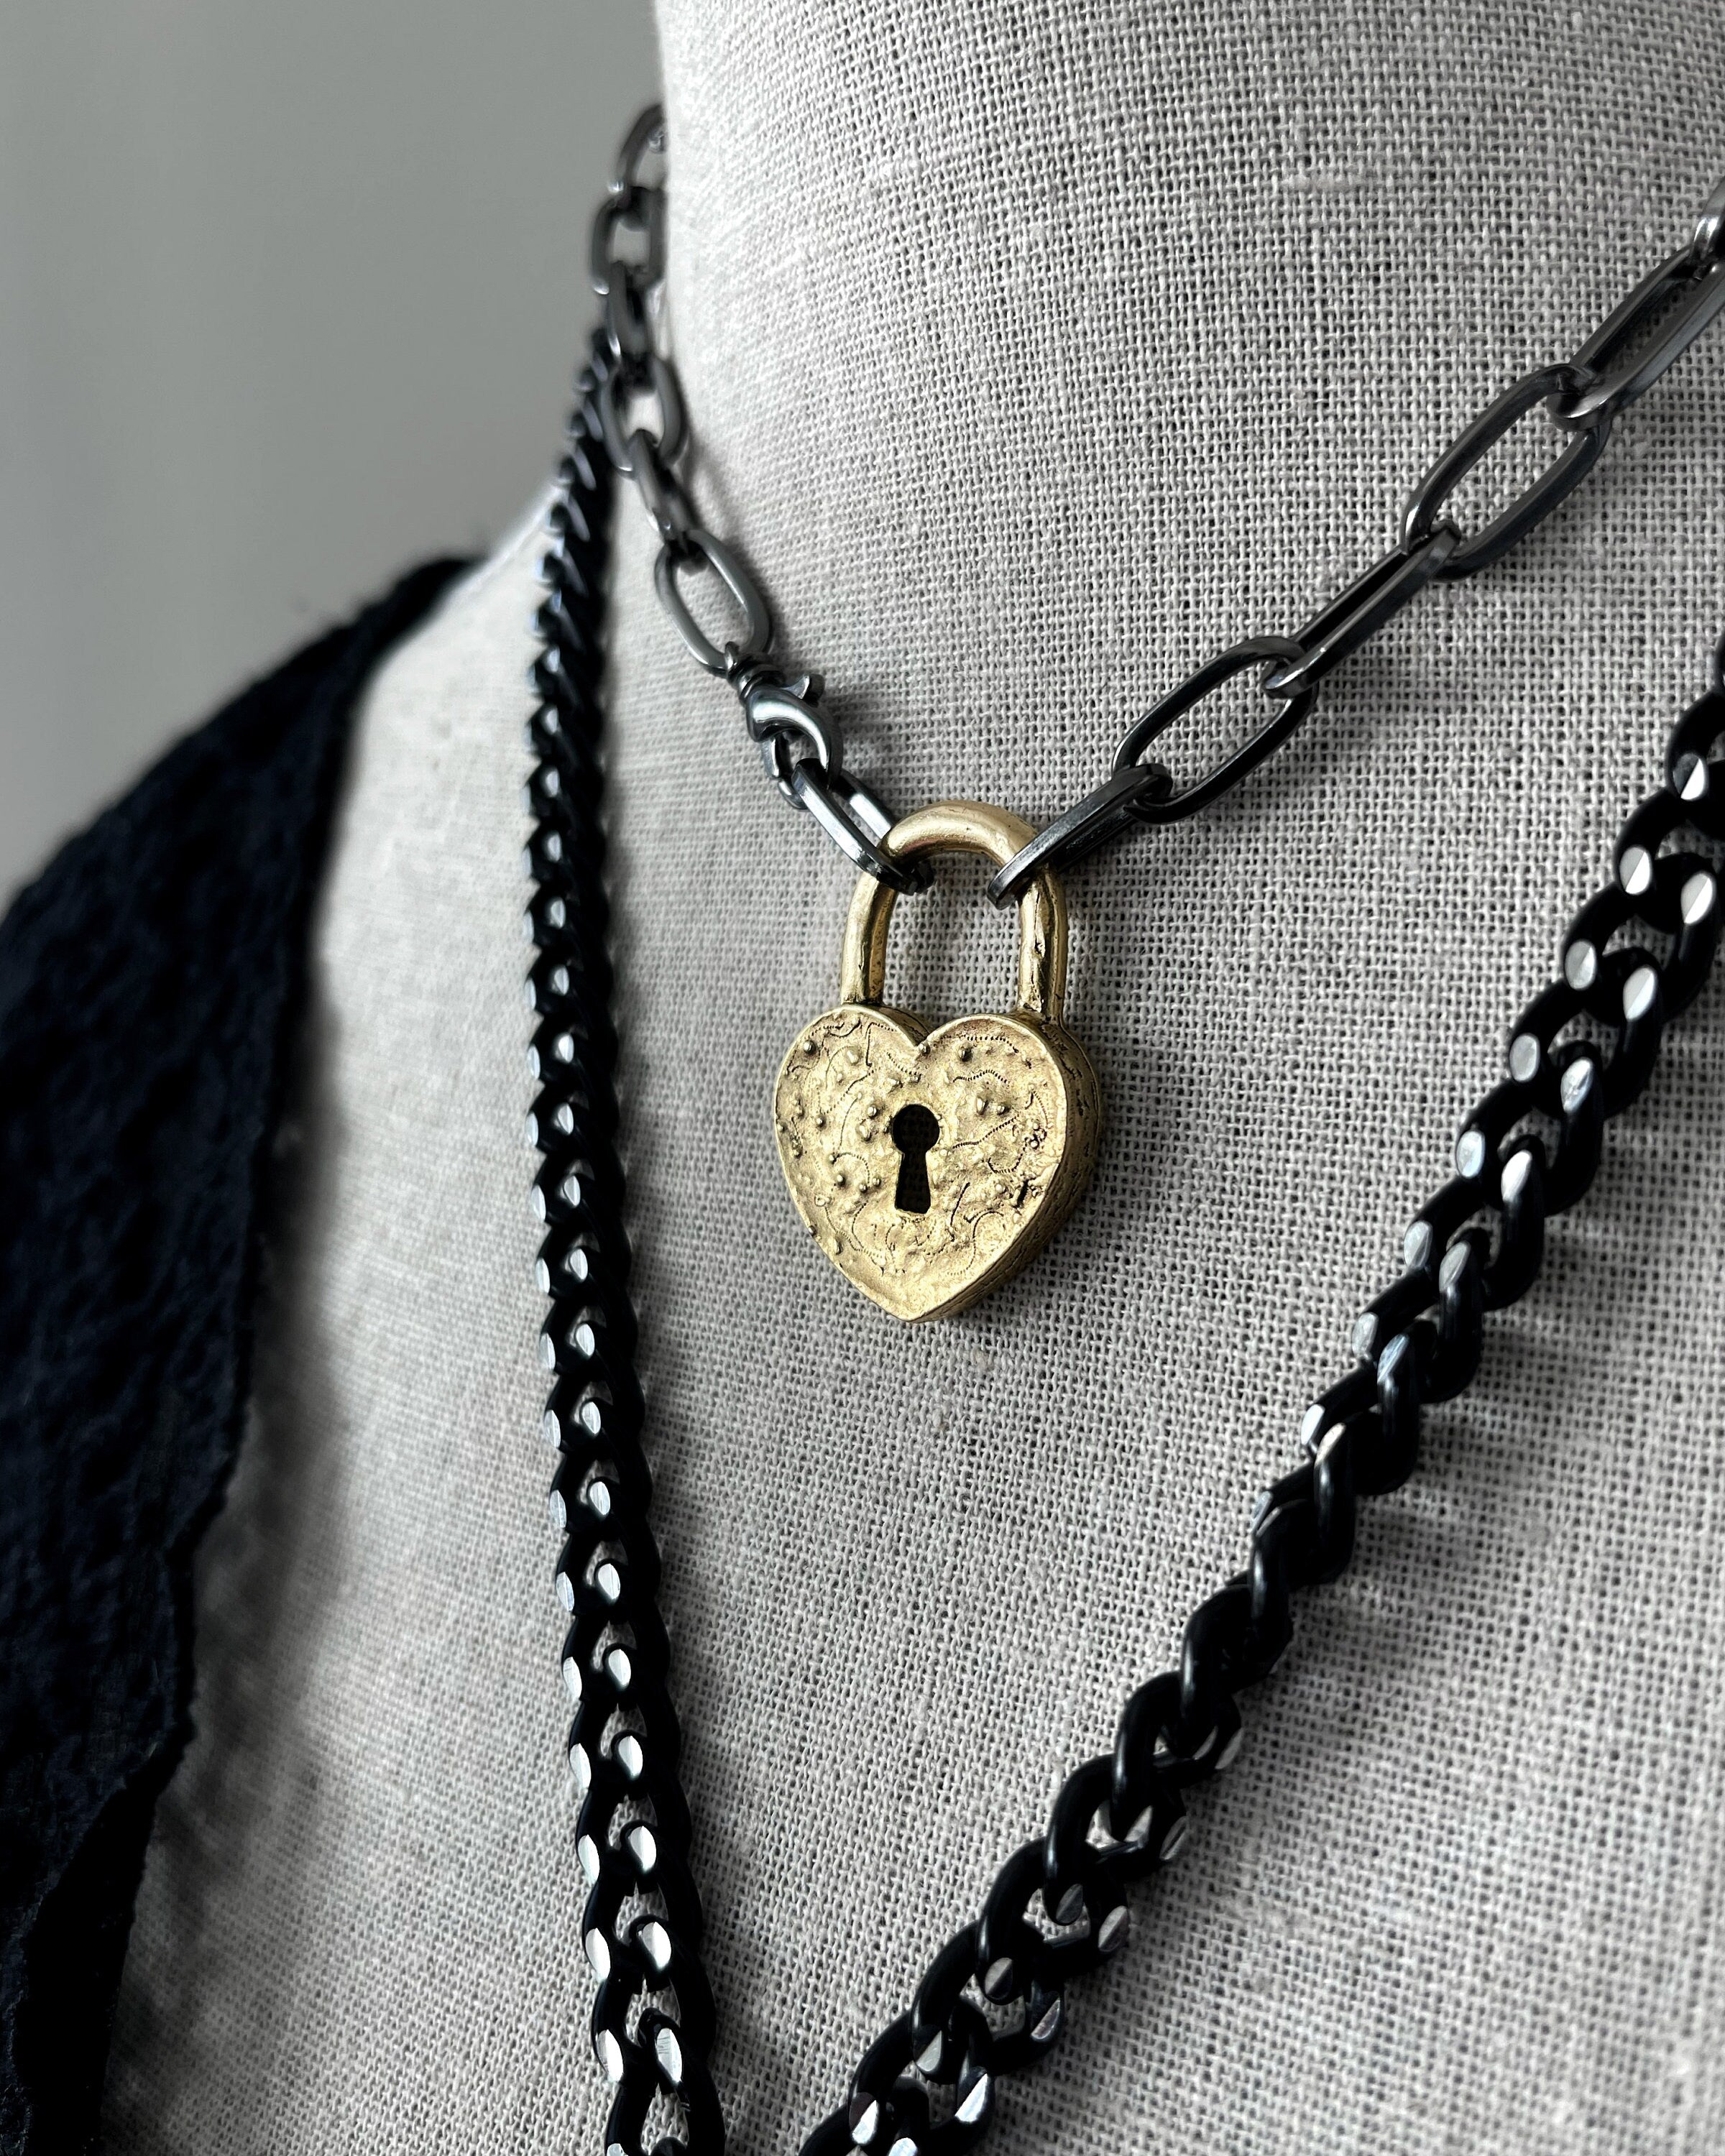 HEART of GOLD - Gold Heart Lock Necklace - Golden Heart Lock Pendant with Chunky Black Chain - Edgy Gothic Goth Valentine's Day Jewelry